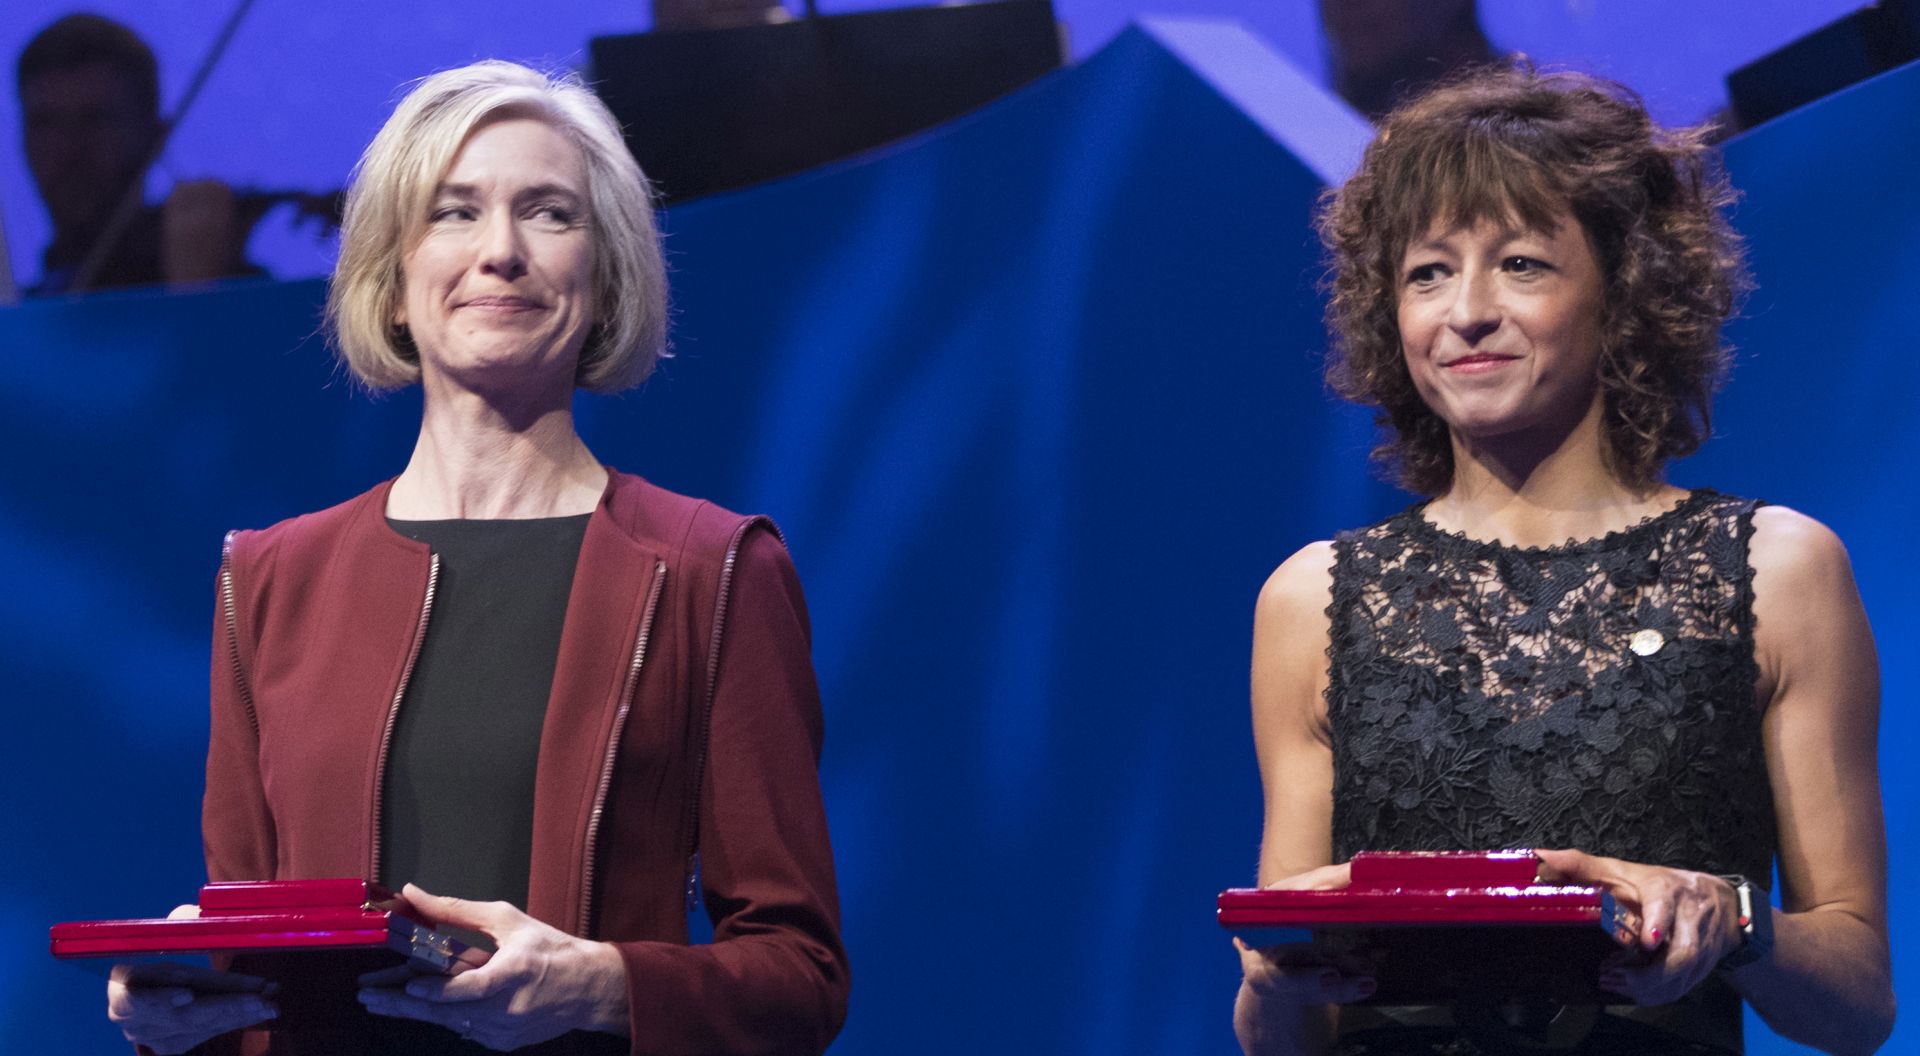 epa08726165 (FILE) - US biochemist Jennifer A. Doudna (L) and French professor and researcher in microbiology, genetics and biochemistry Emmanuelle Charpentier (R) as they receive the Kavli Prize in Nanoscience, at the Oslo Concert Hall, Norway, 04 September 2018 (reissued 07 October 2020). The 2020 Nobel Prize in Chemistry has been awarded to Emmanuelle Charpentier and Jennifer A. Doudna 'for the development of a method for genome editing', the Royal Swedish Academy of Sciences announced.  EPA/Berit Roald NORWAY OUT *** Local Caption *** 52647364